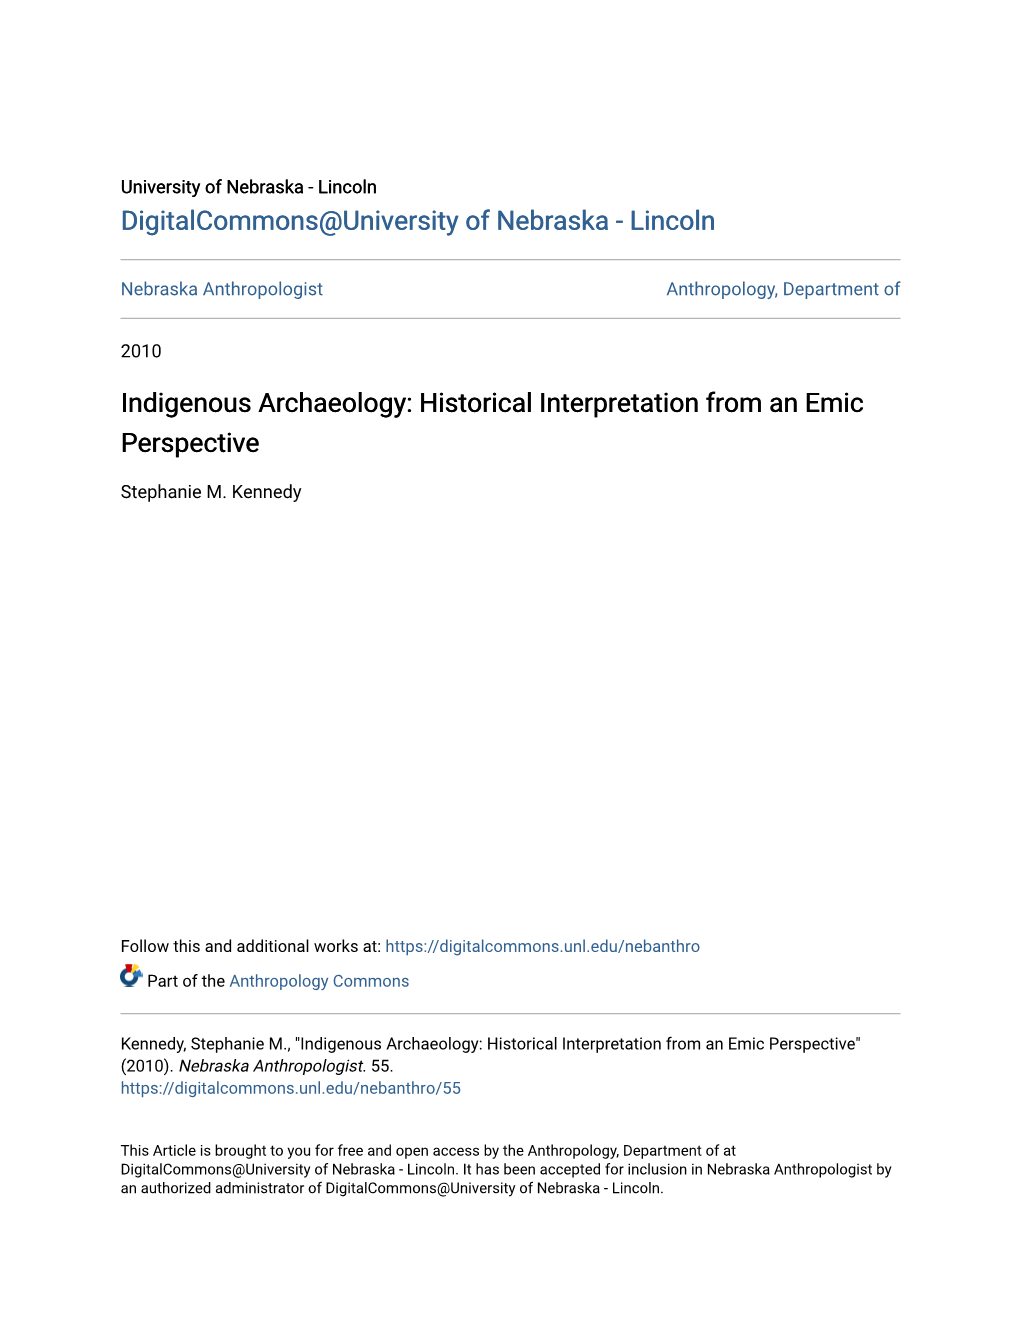 Indigenous Archaeology: Historical Interpretation from an Emic Perspective